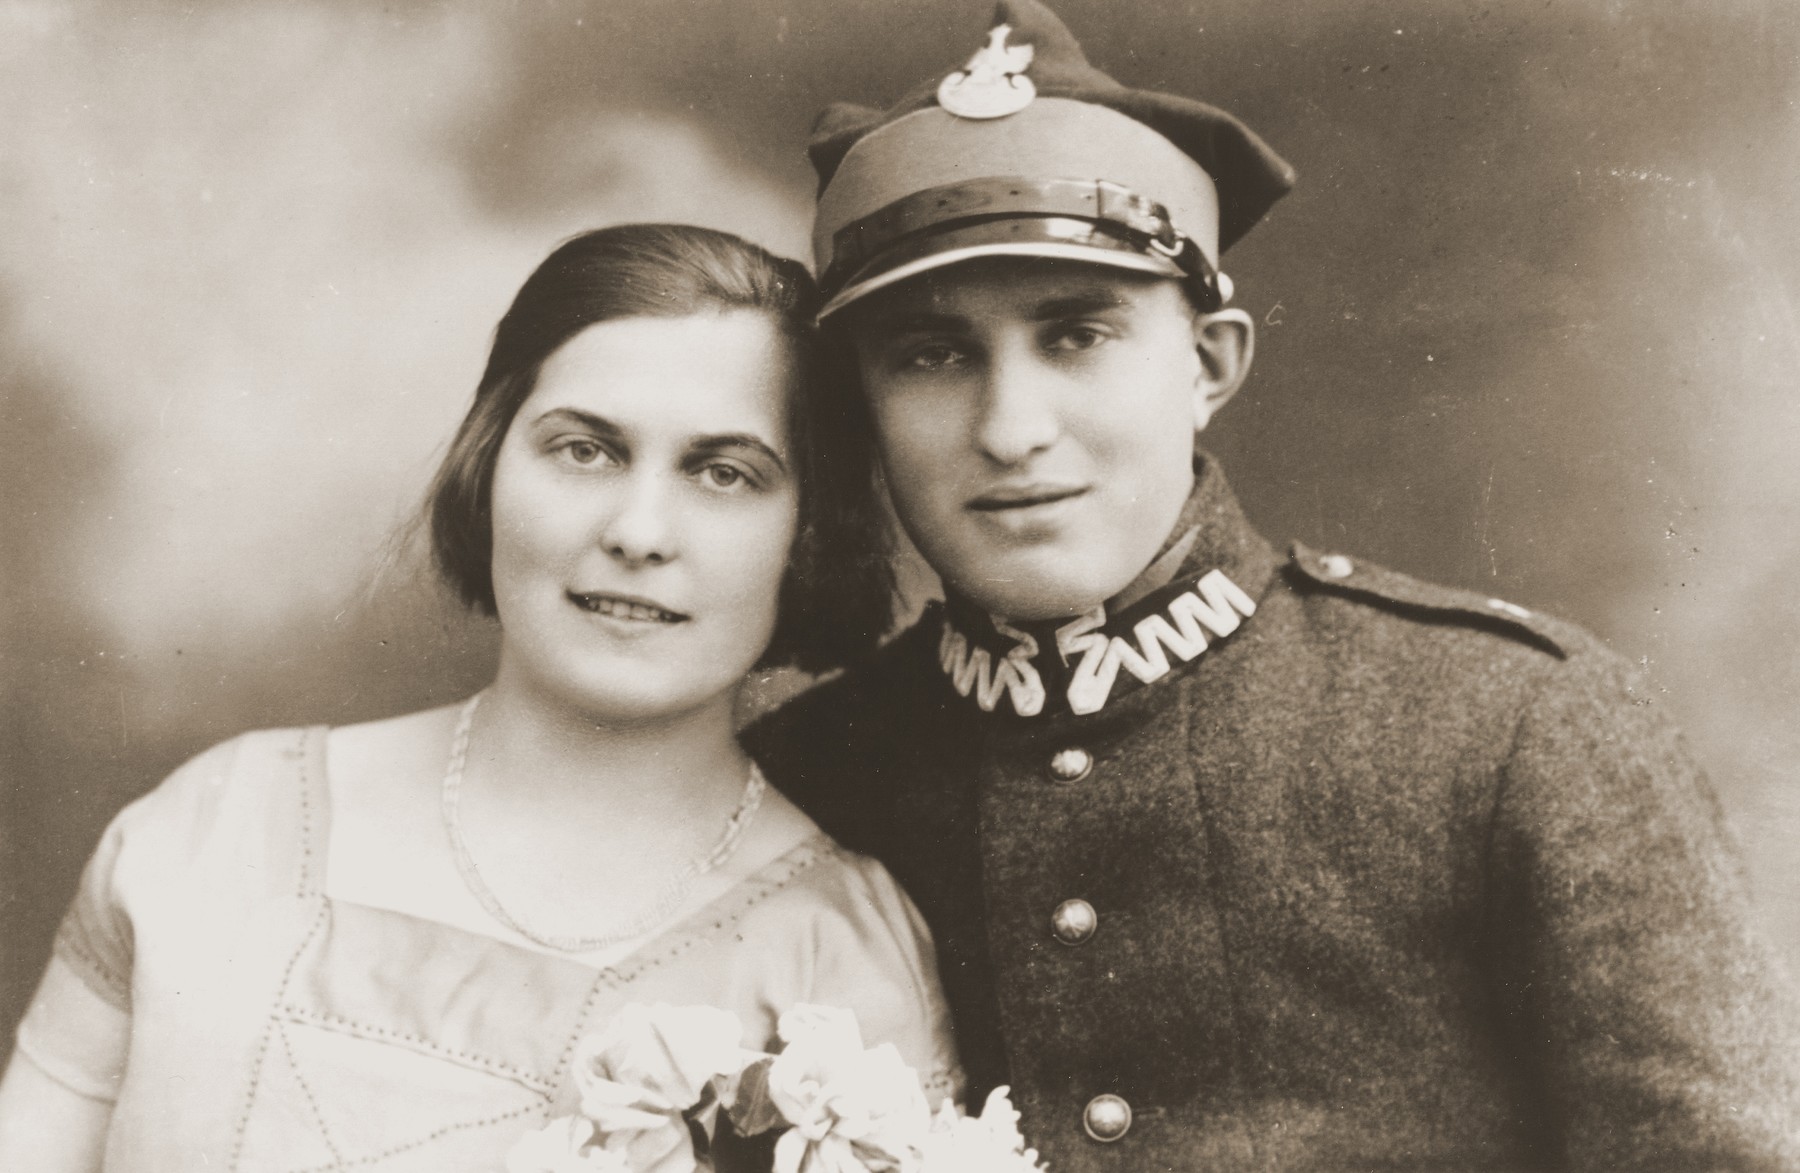 Studio portrait of two Jewish siblings in Zarki.

Pictured are Tola and Moszek Broda.  Moszek is in the uniform of the Polish army.